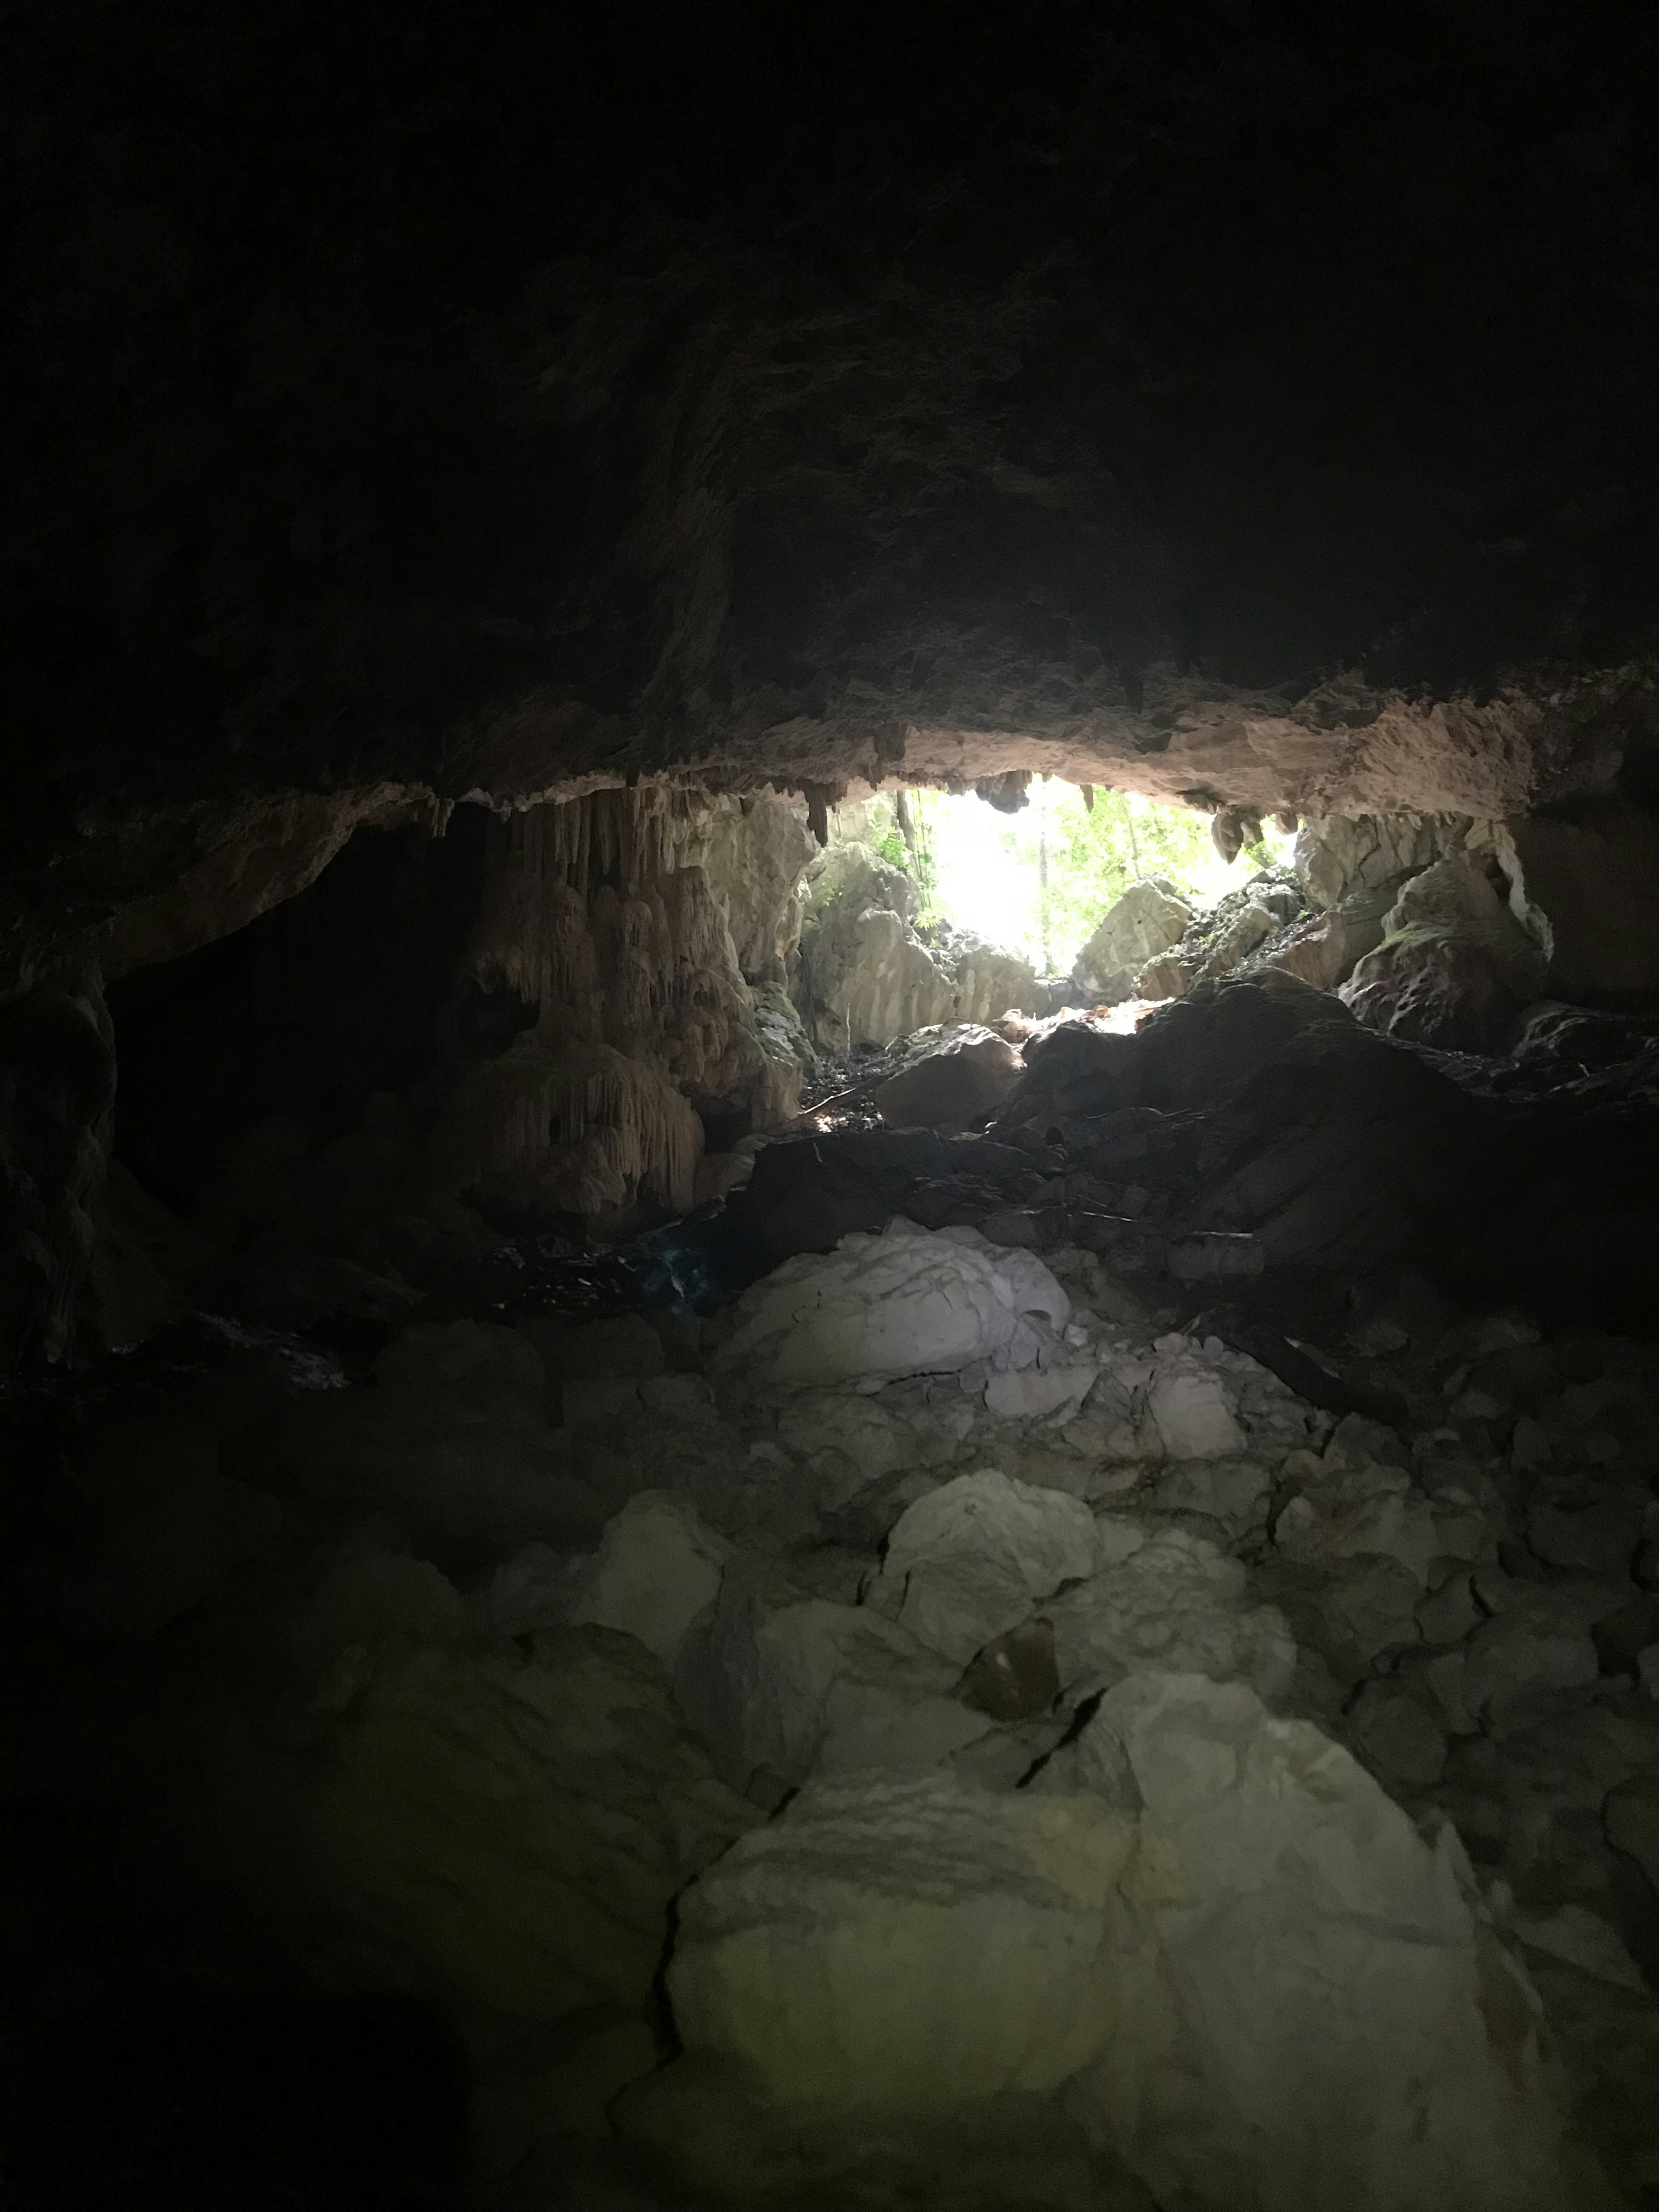 The exit of a cave to the outside, seen from inside the cave.